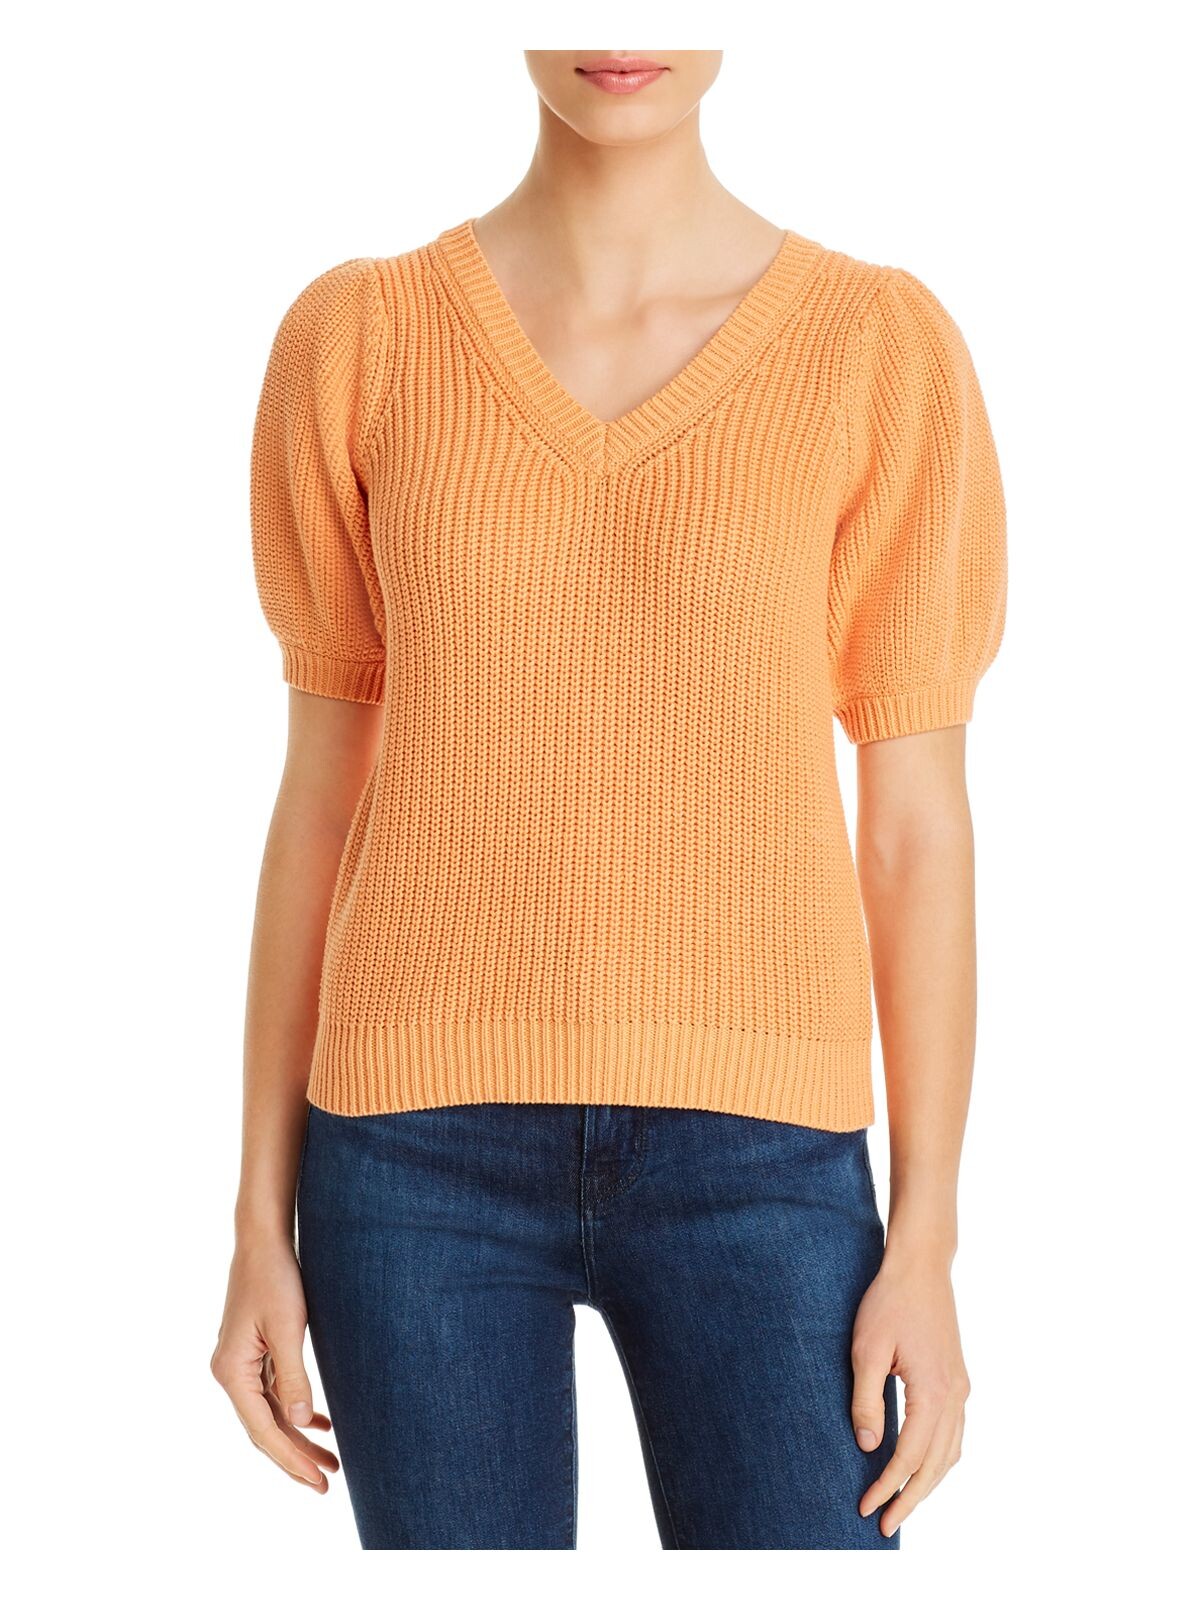 525 AMERICA Womens Orange Stretch Ribbed Pull Over Style Pouf Sleeve V Neck Blouse XS